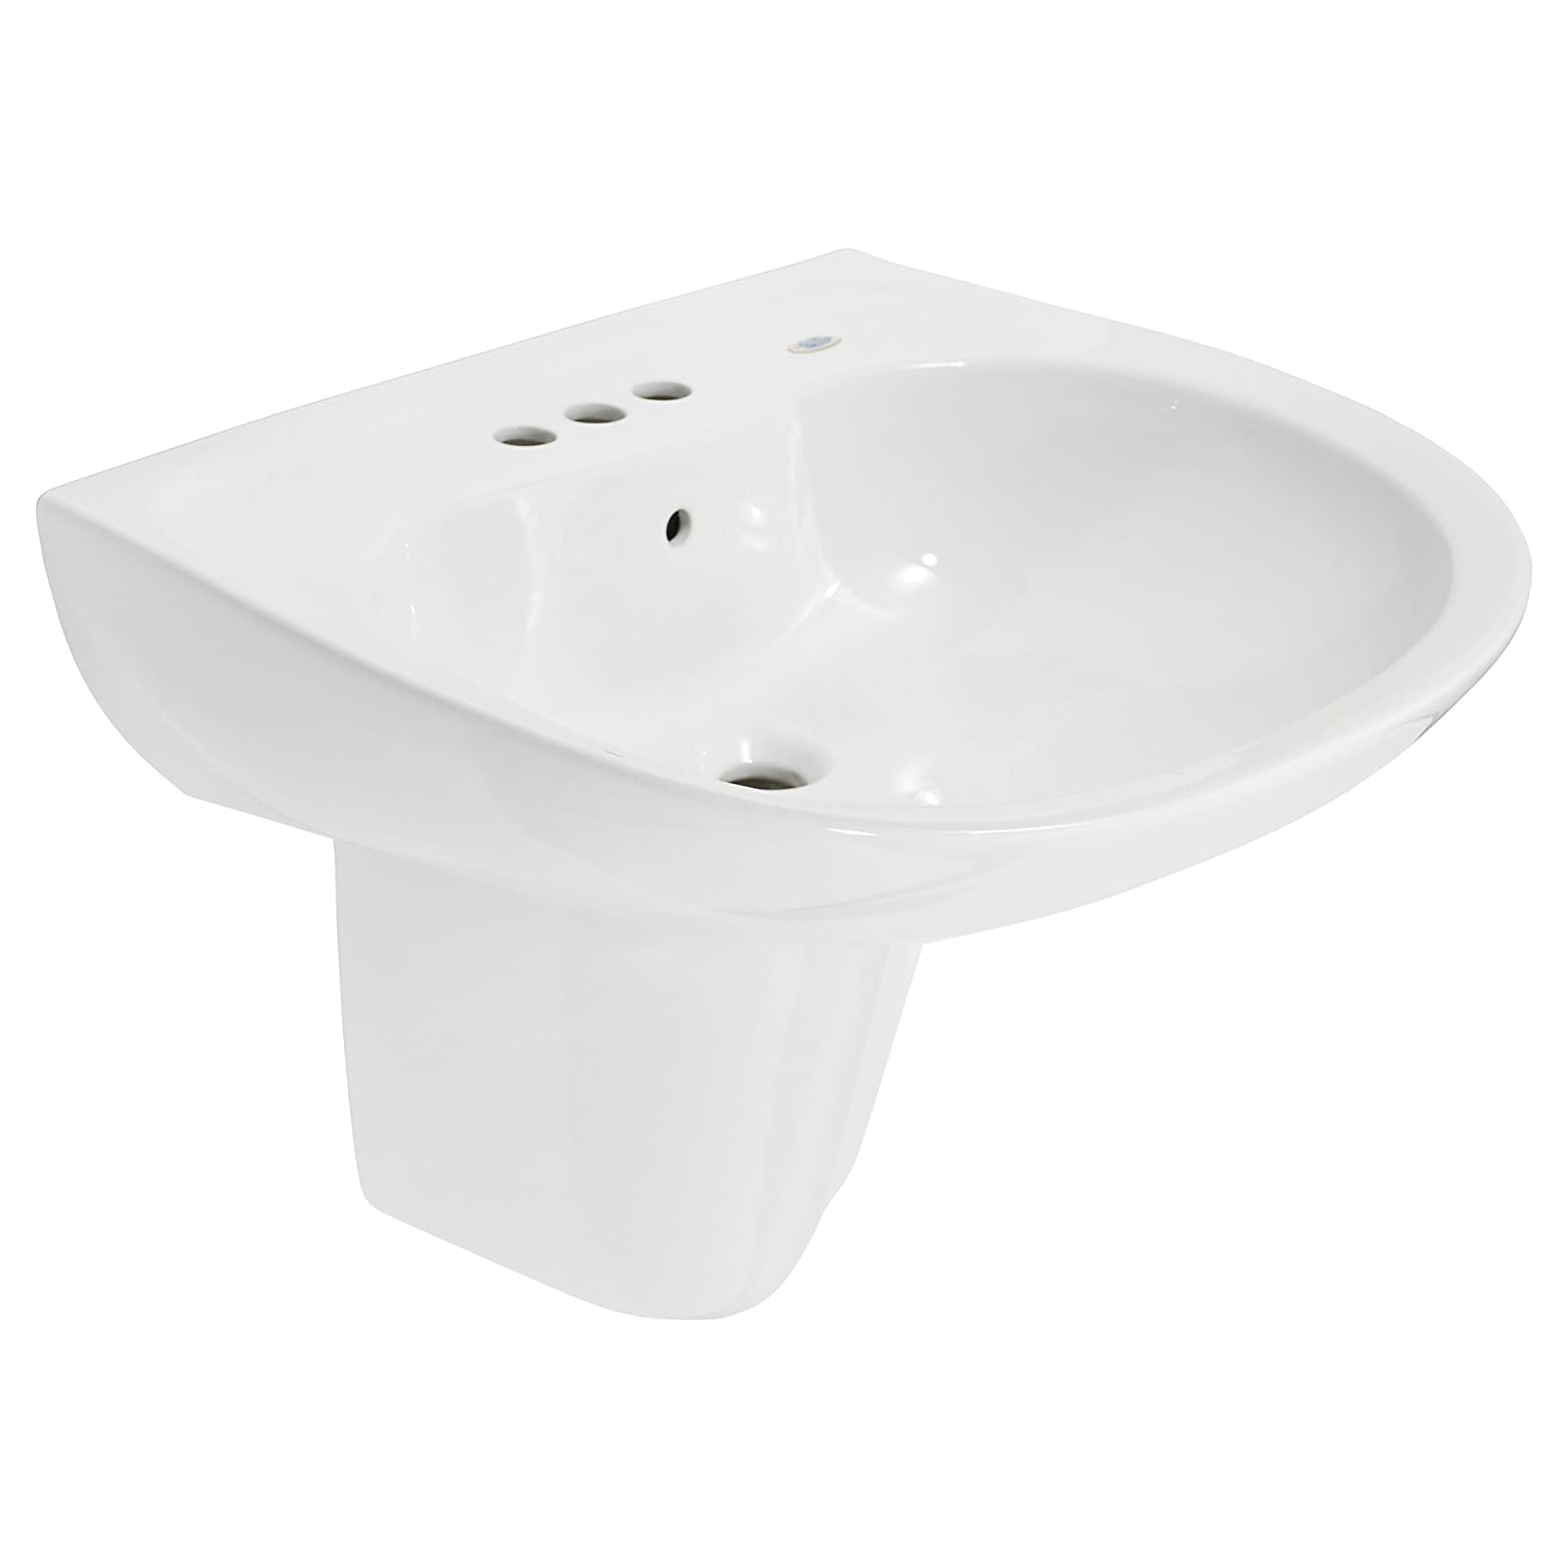 Prominence 26x21"Wall Mount Lav Sink in Cotton White w/1 Fct Hole